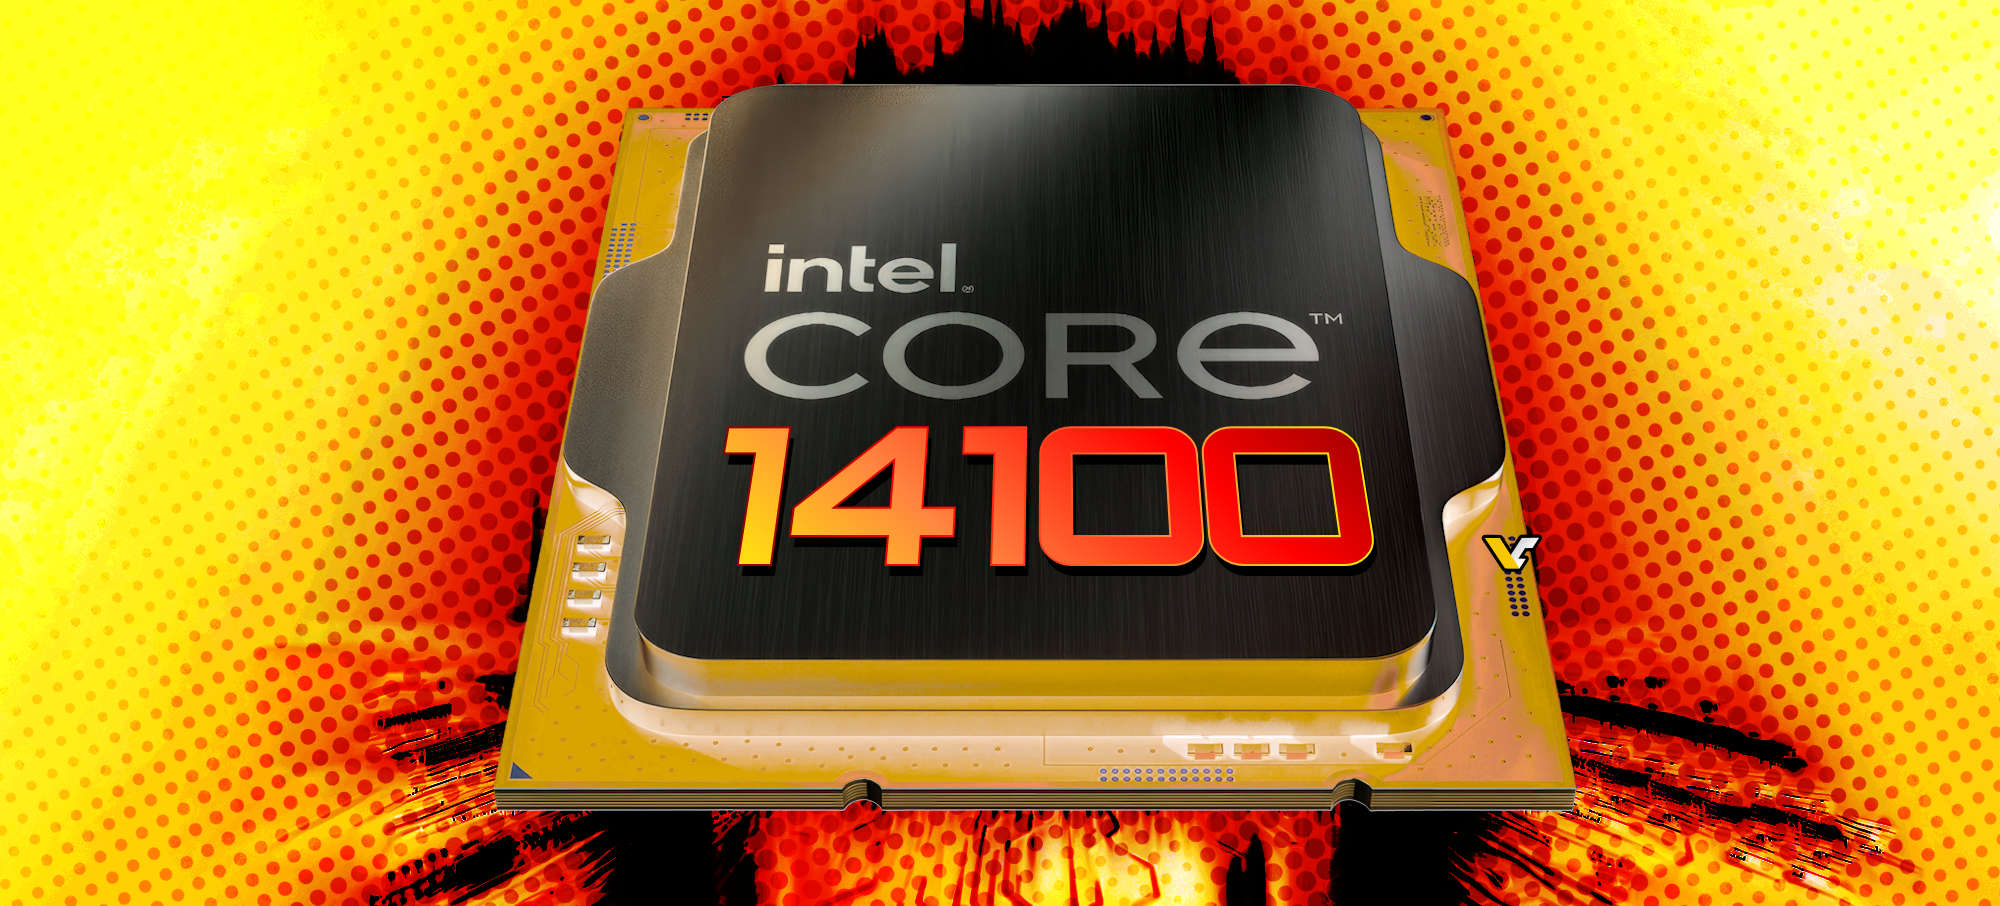 Intel Core i3-14100 quad-core desktop CPU is priced at $150 by